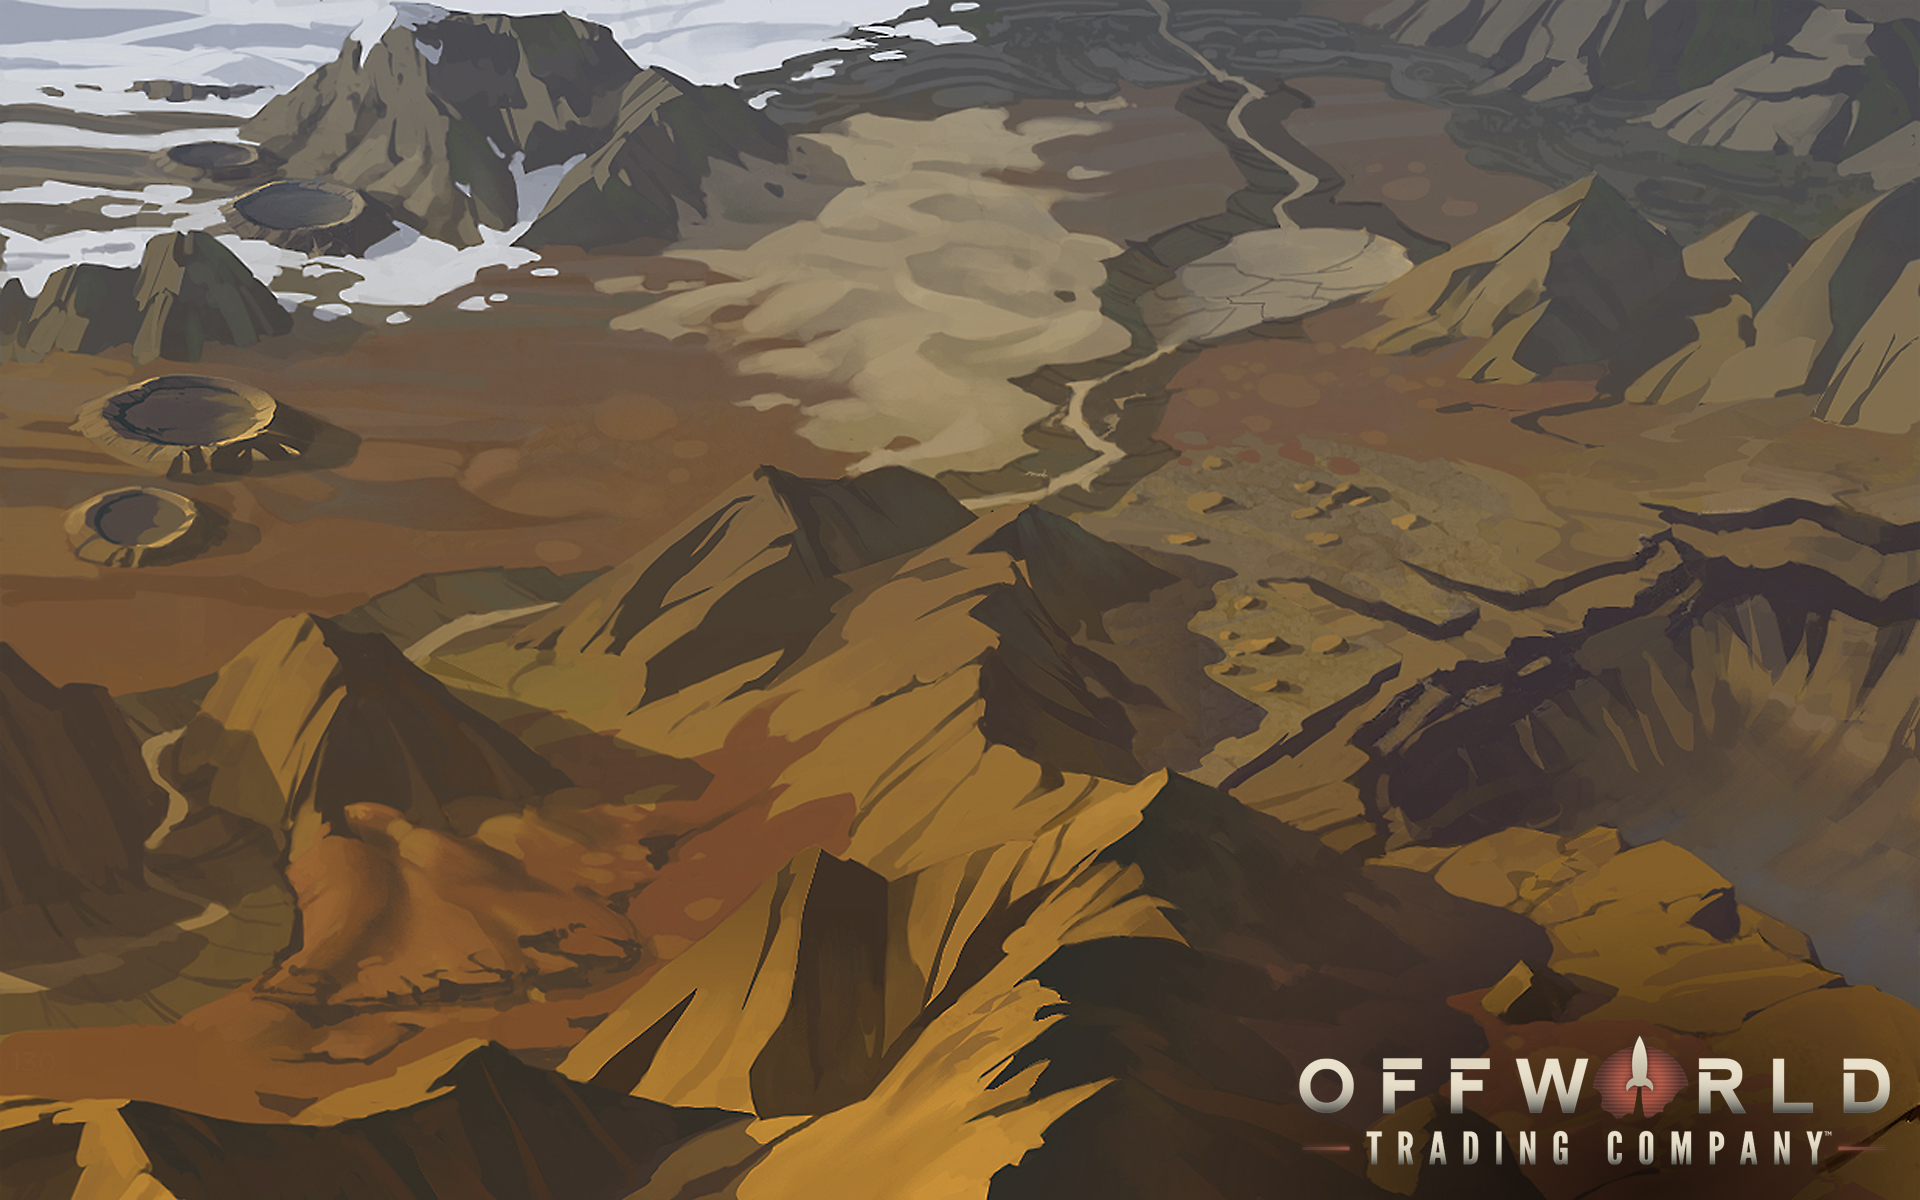 Offworld, Offworld Trading Company, Real Time Strategy, Loading screen, Stardock, Mohawk Games,  PCMR, PC gaming Wallpaper